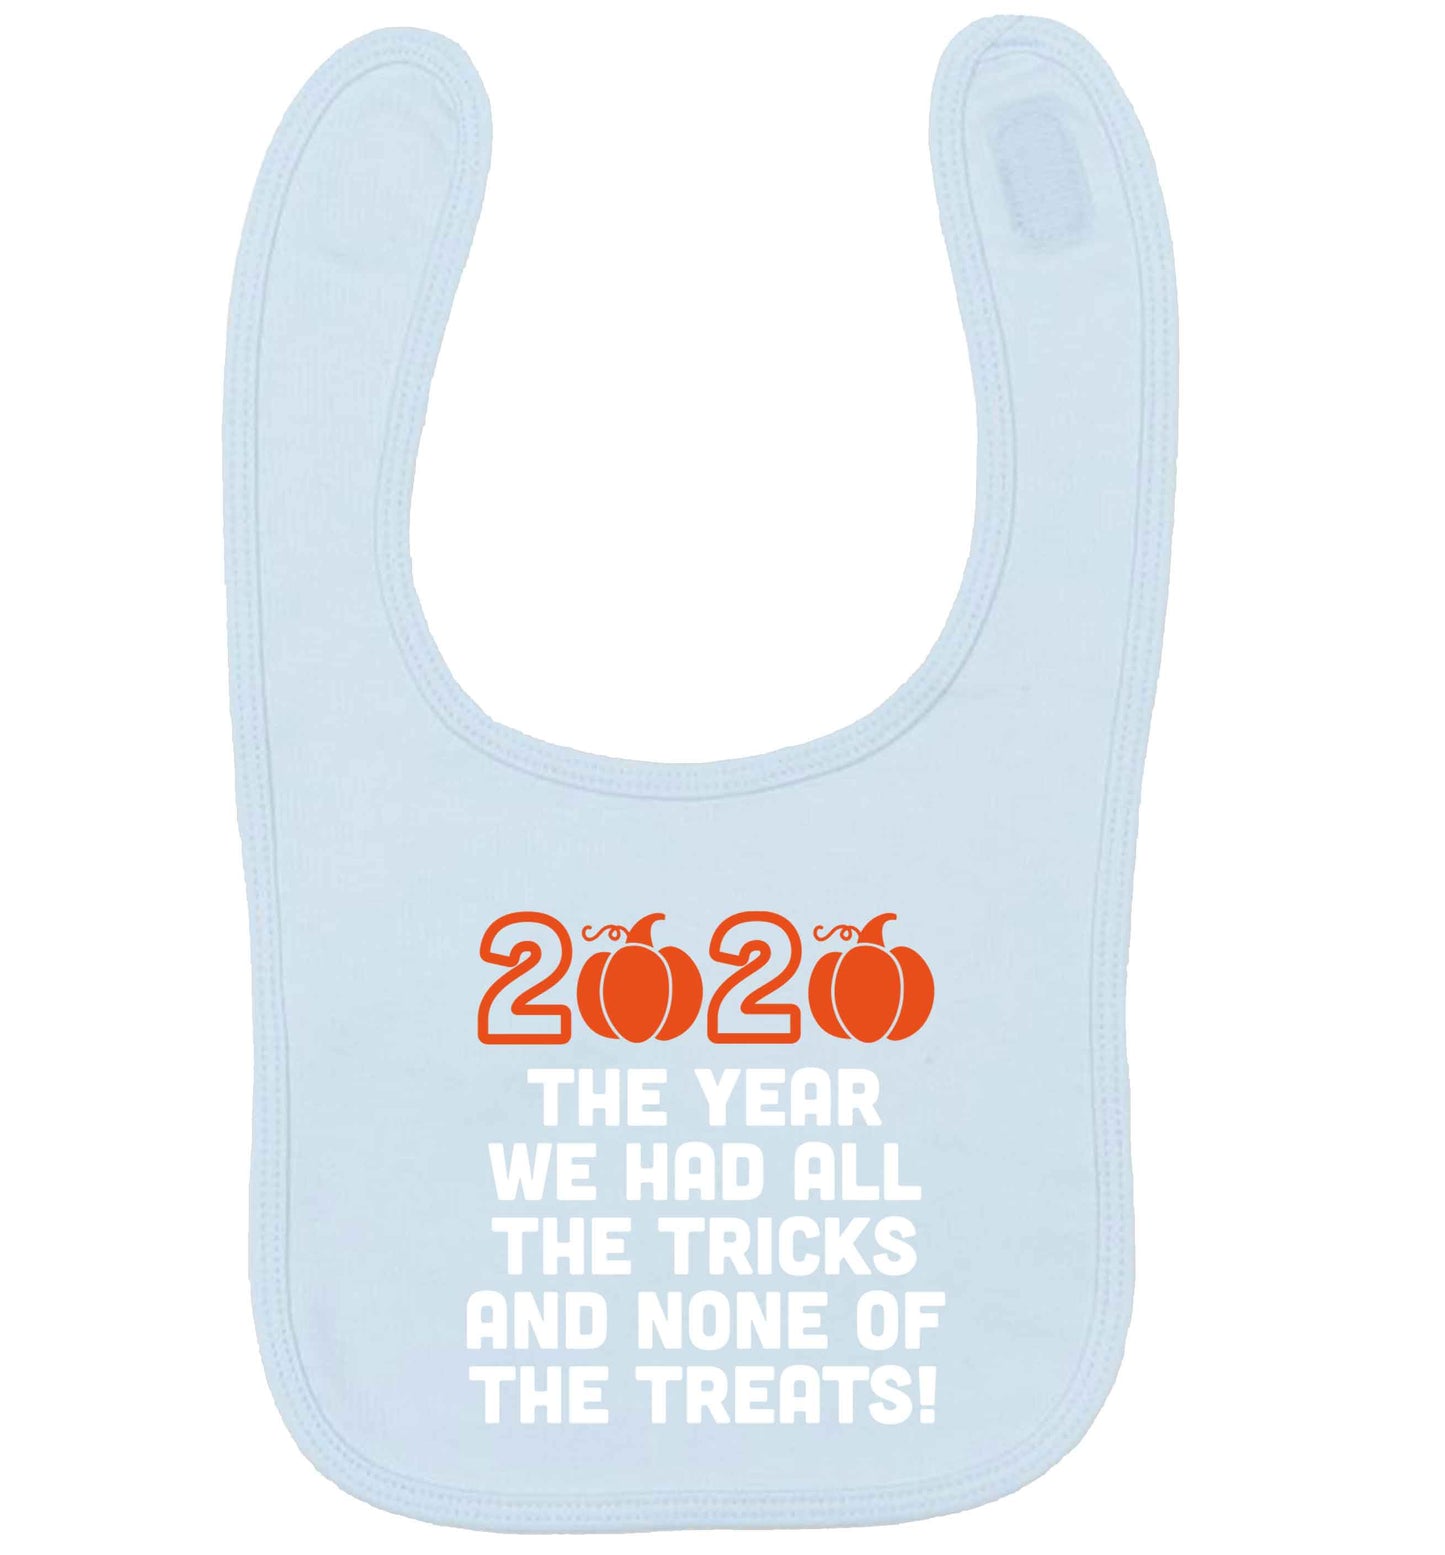 2020 The year we had all of the tricks and none of the treats pale blue baby bib